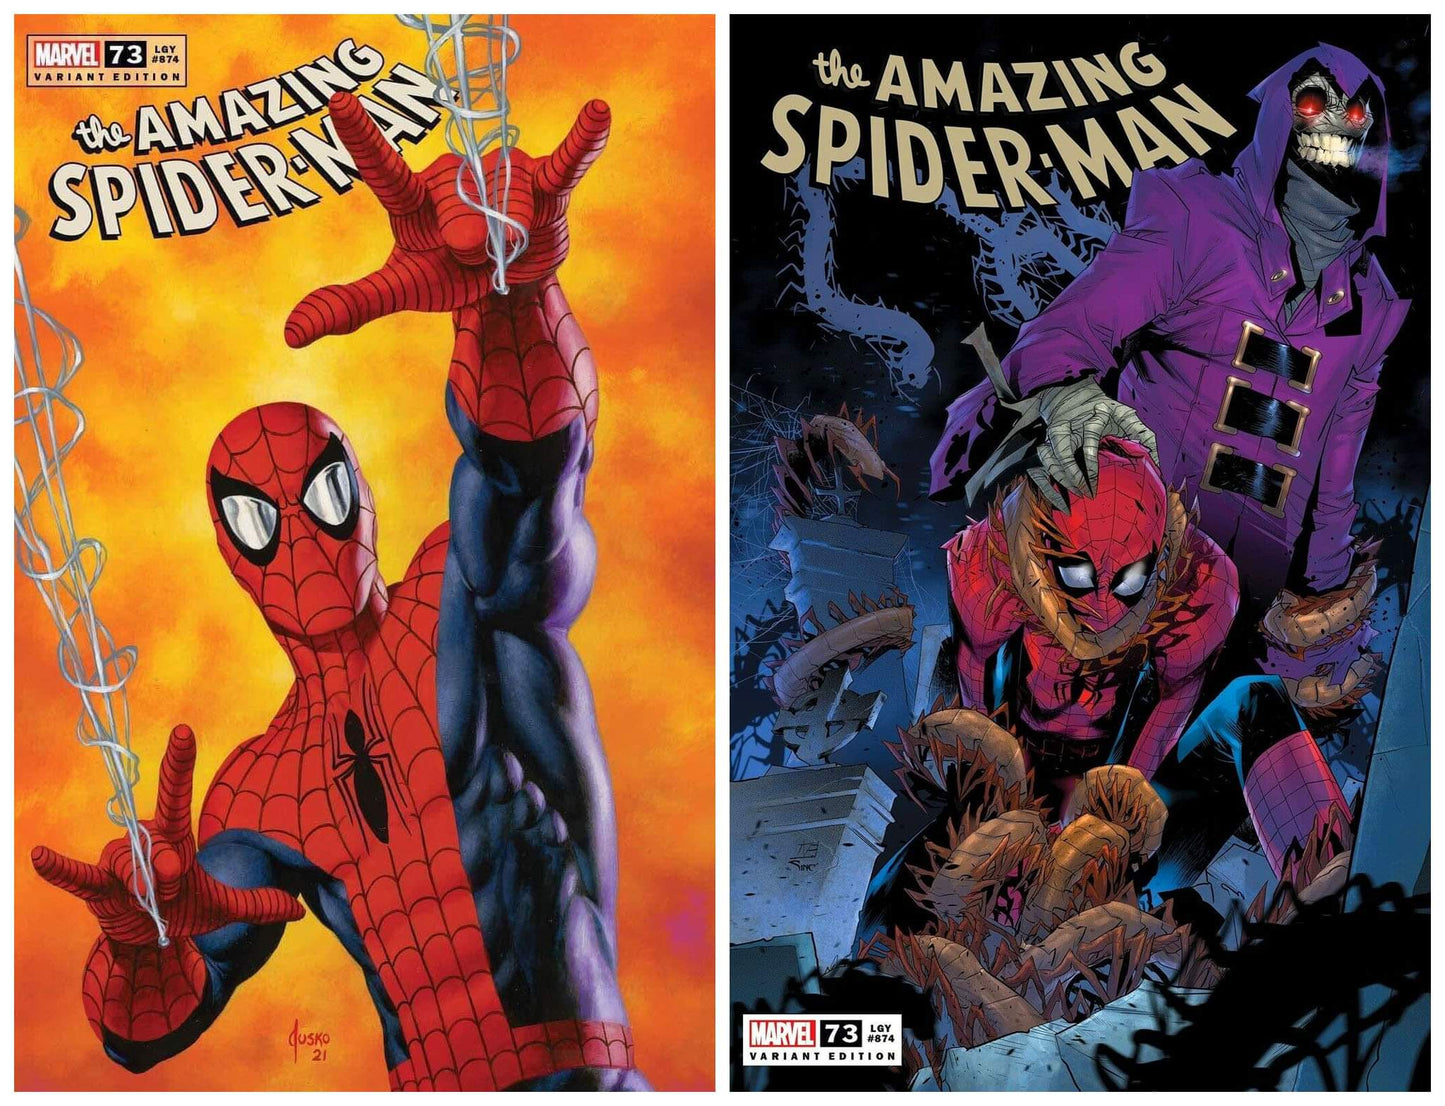 AMAZING SPIDER-MAN #73 JOE JUSKO EXCLUSIVE VARIANT LIMITED TO ONLY 1000 WITH COA & 1:25 VICENTI VARIANT